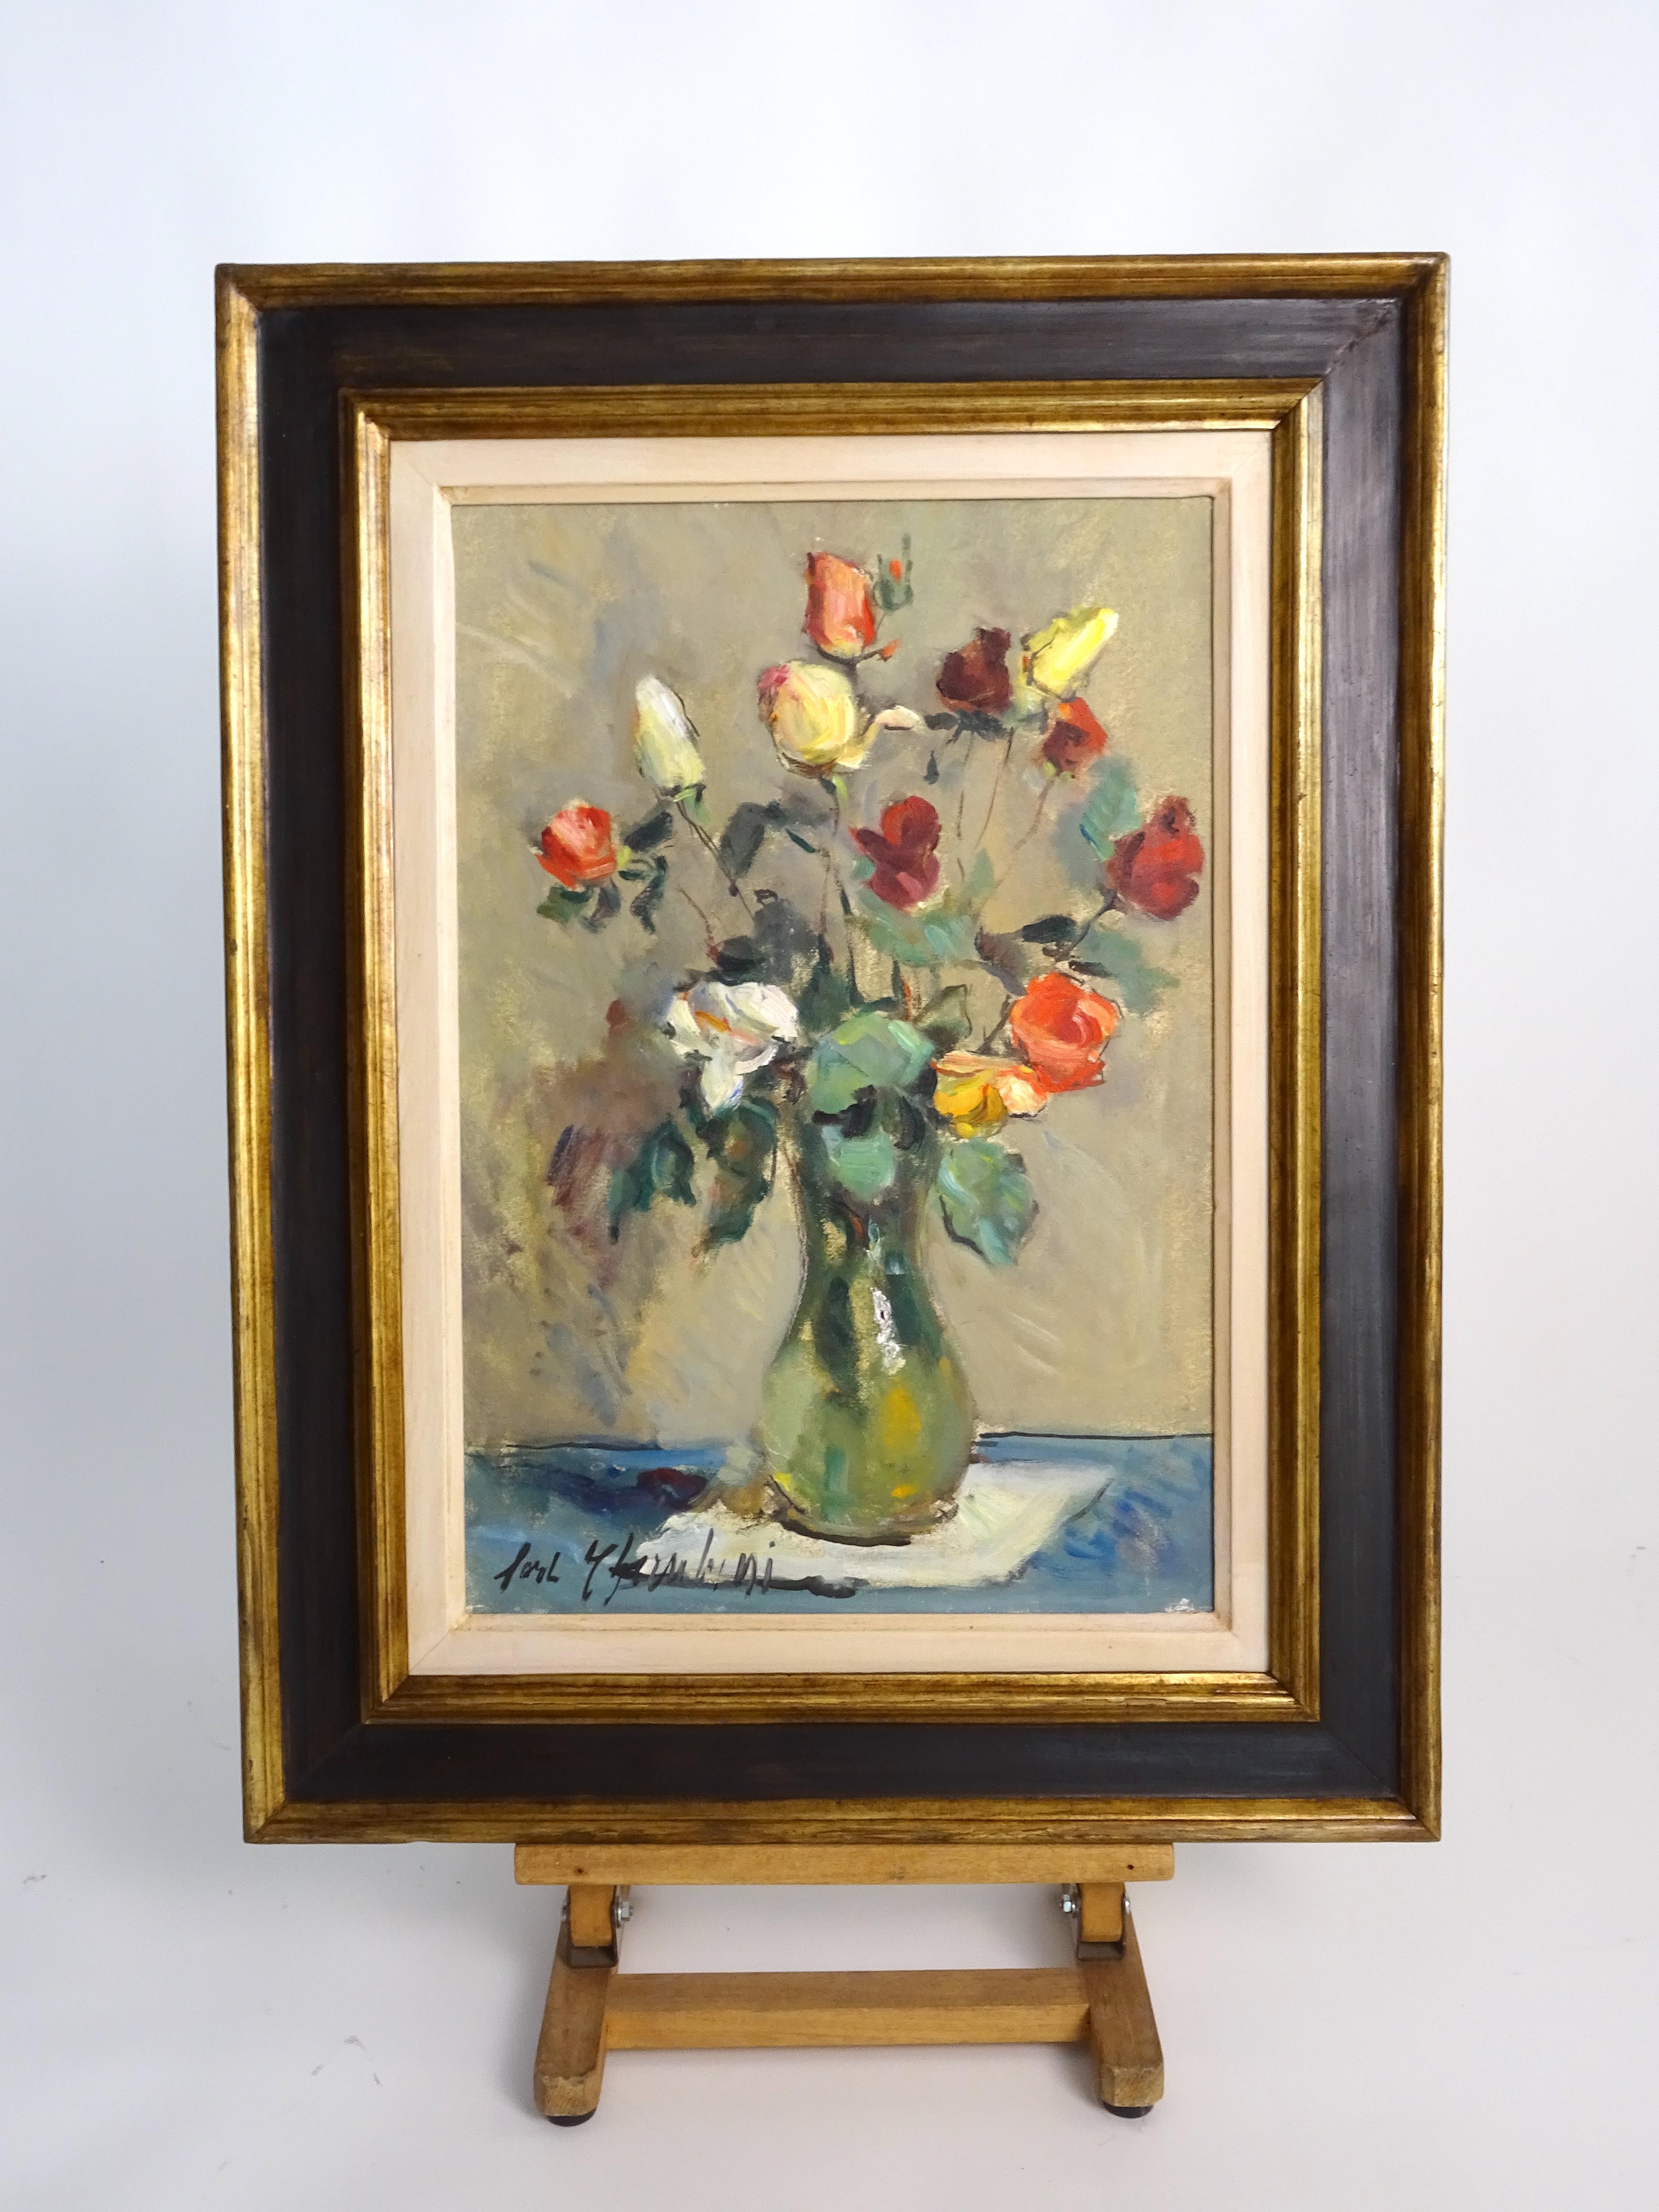 The work in question is painted in oil on canvas. It is a graceful representation of a vase of roses of different colours, which are among the painter's favourite still life subjects. The work is signed in the lower left-hand corner and can be dated